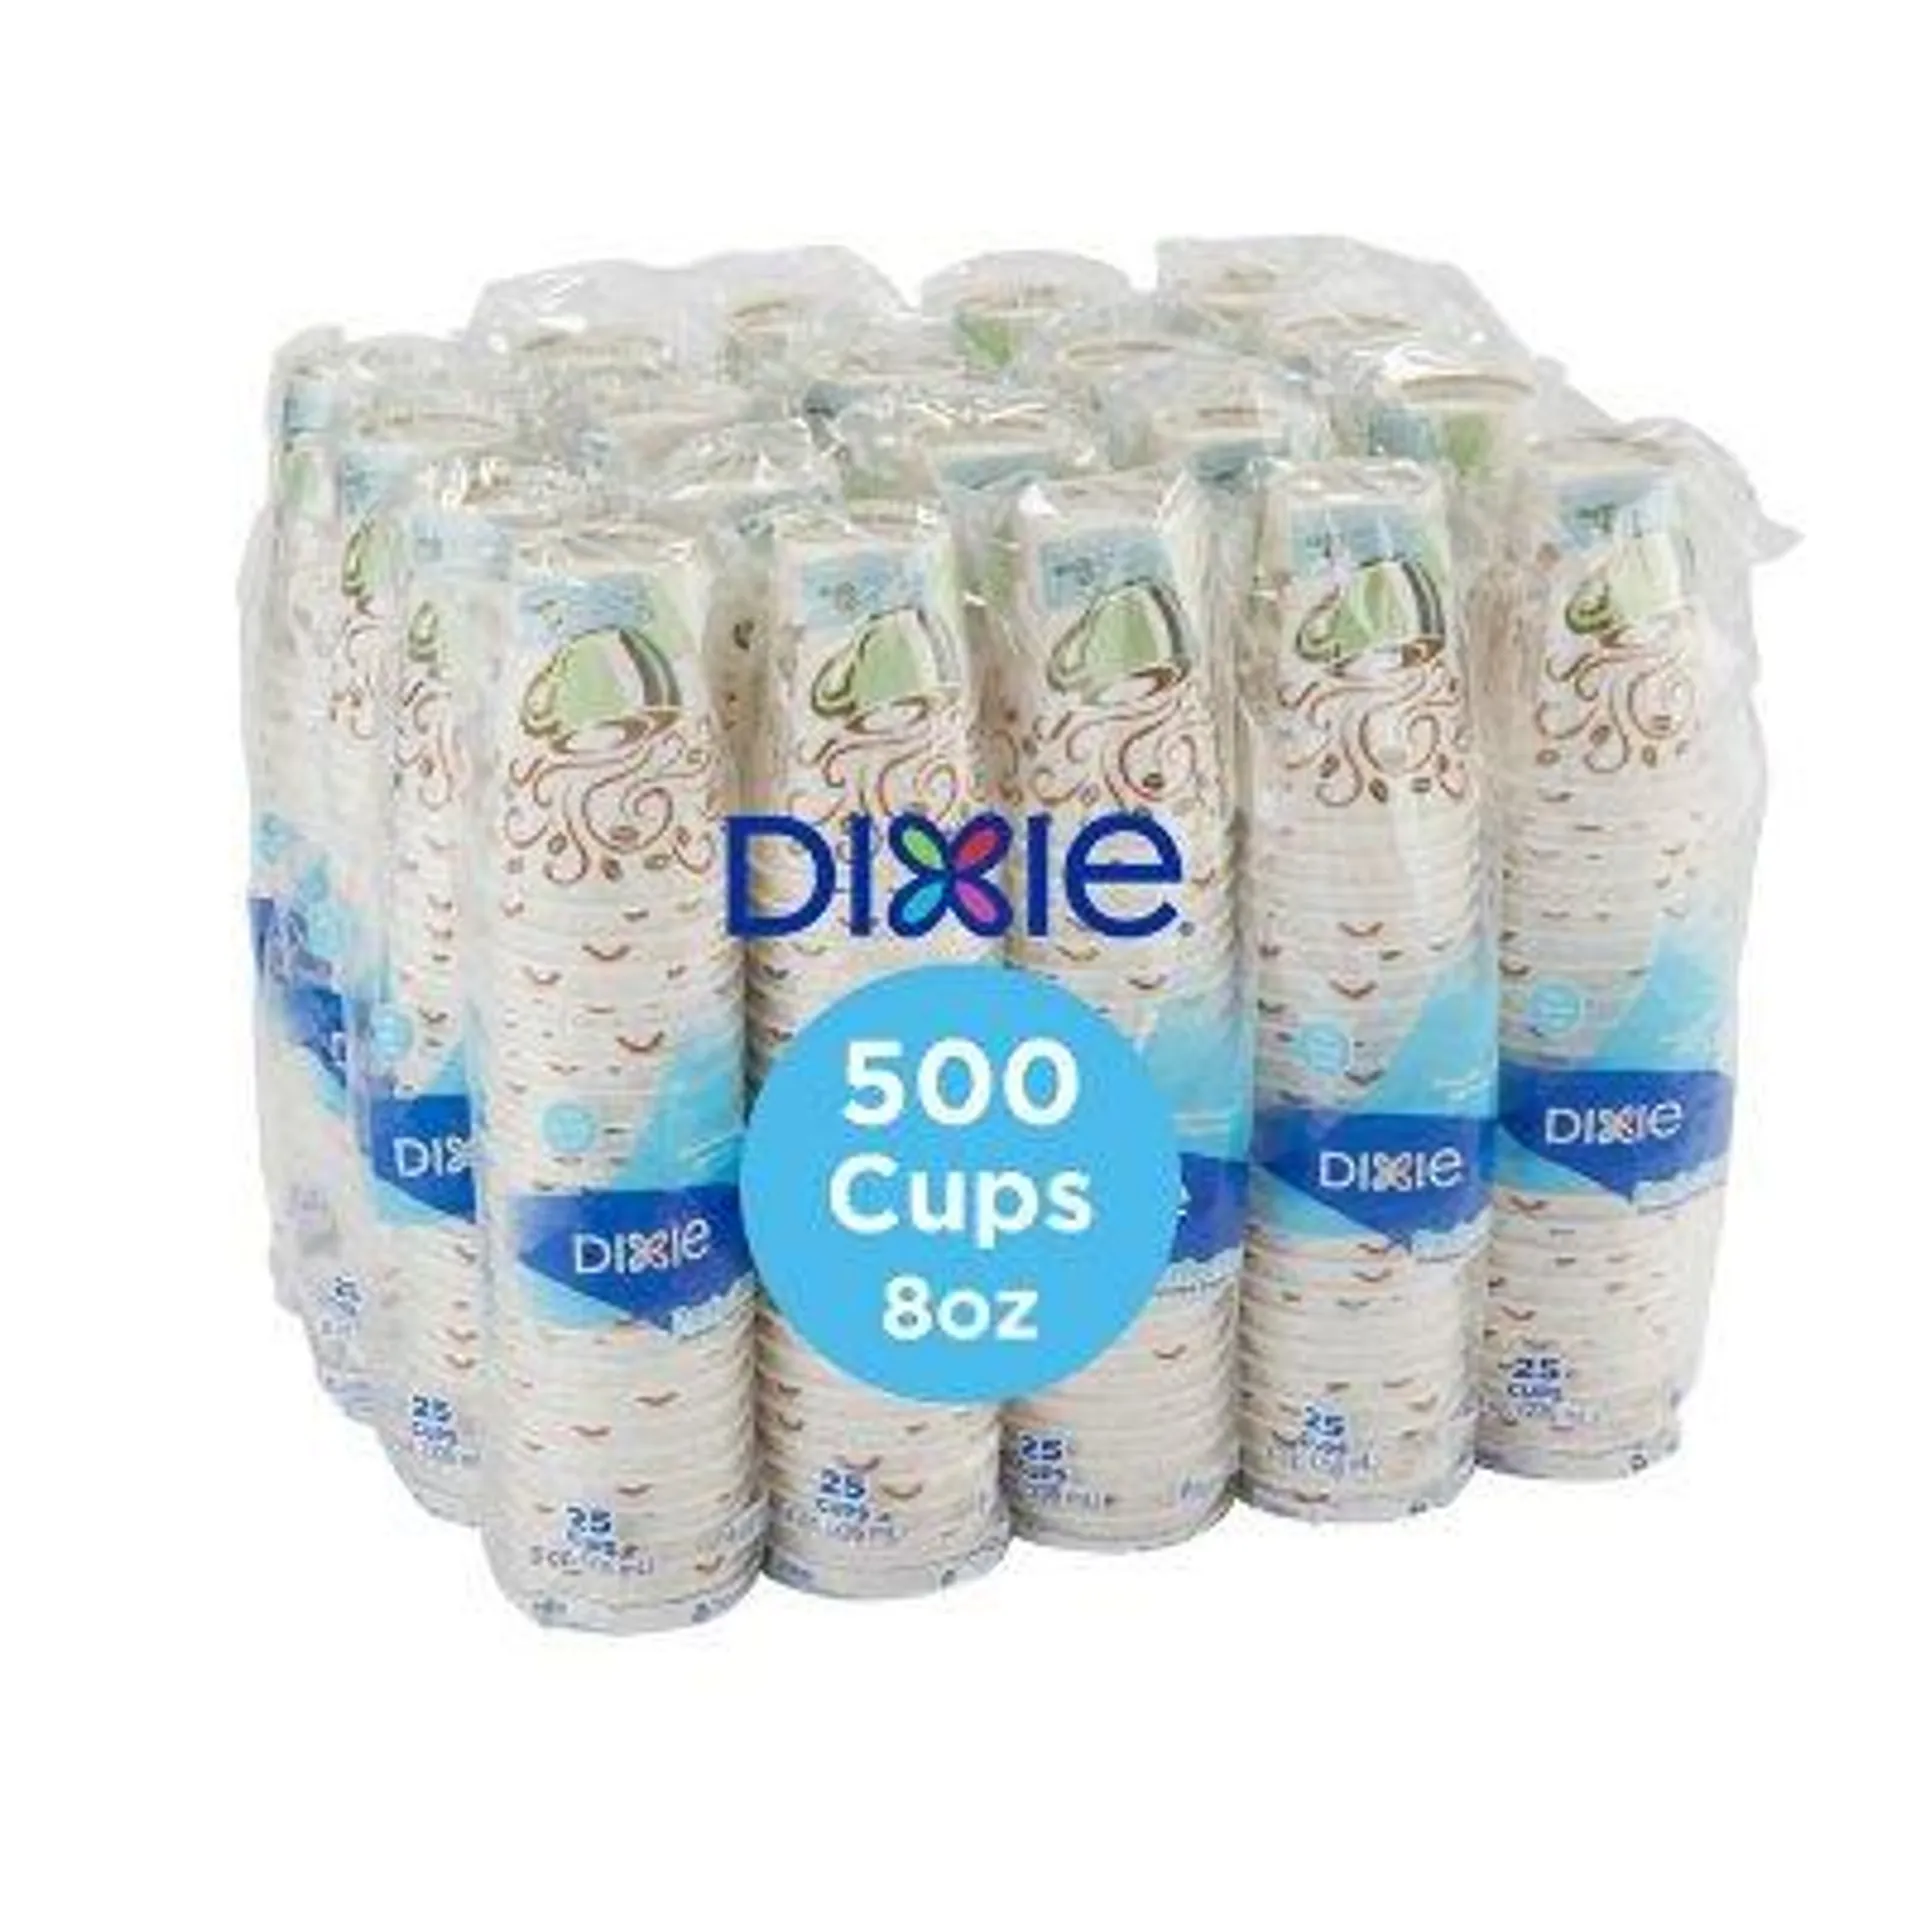 Dixie PerfecTouch Insulated Hot/Cold Paper Cups, Coffee Haze (Various Sizes)